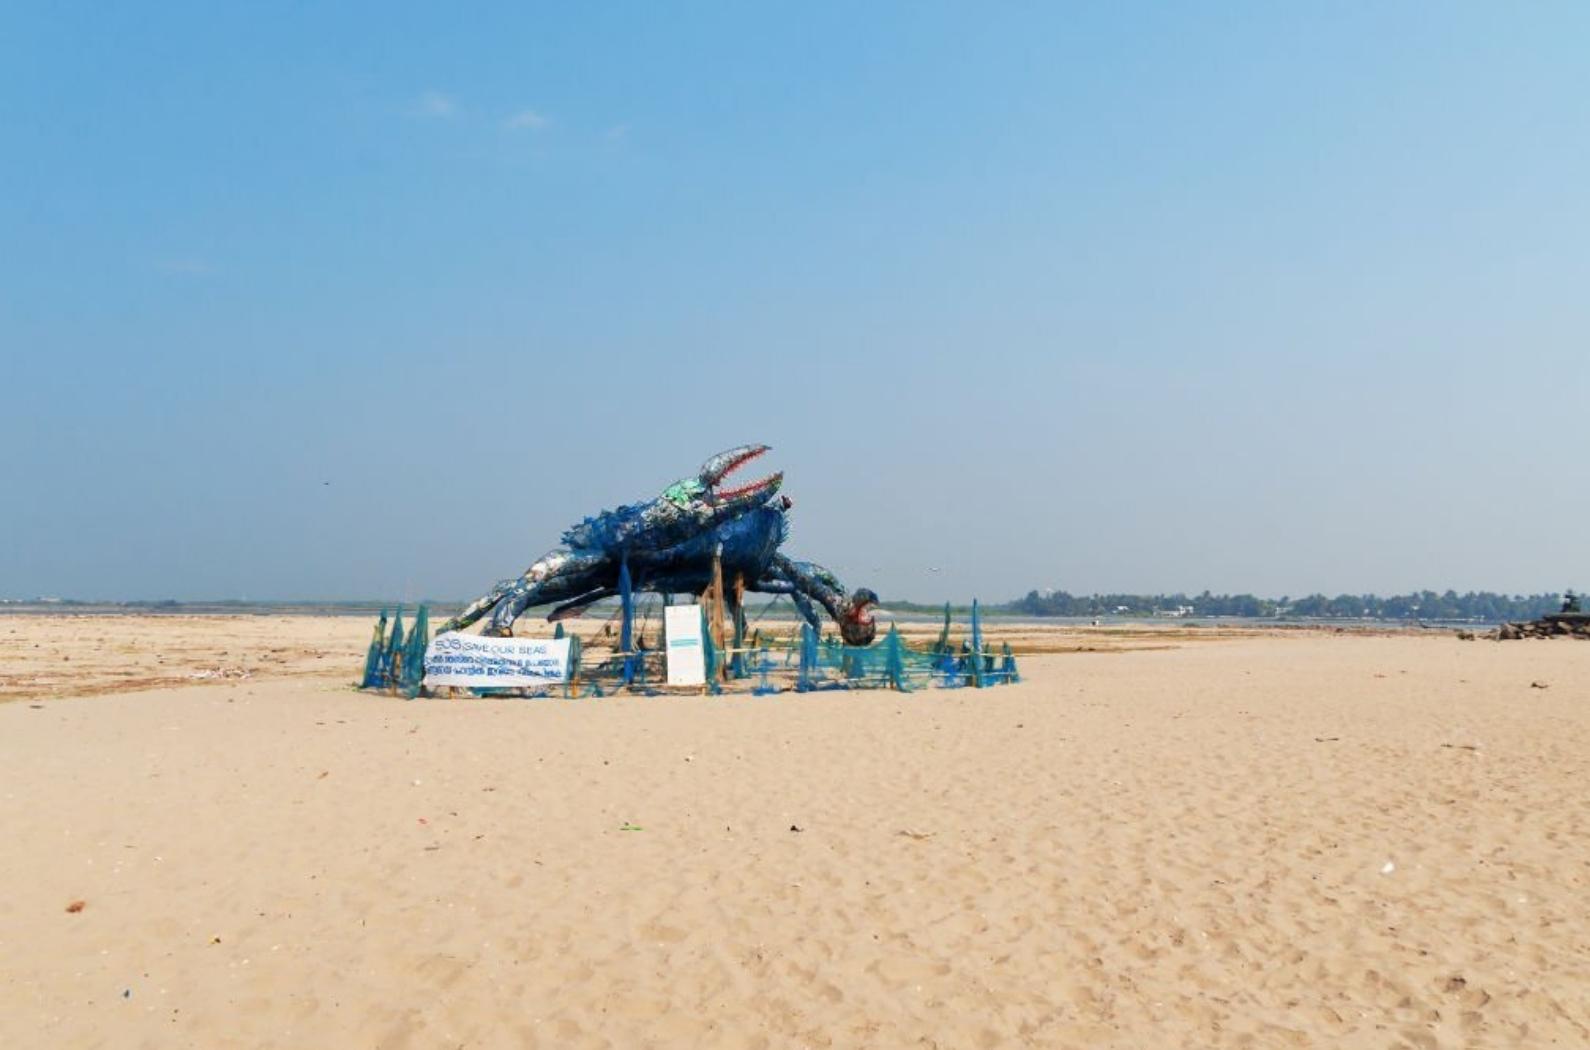 The Mad Crab on the beach, an installation art with Waste Plastics in Fort Kochi.